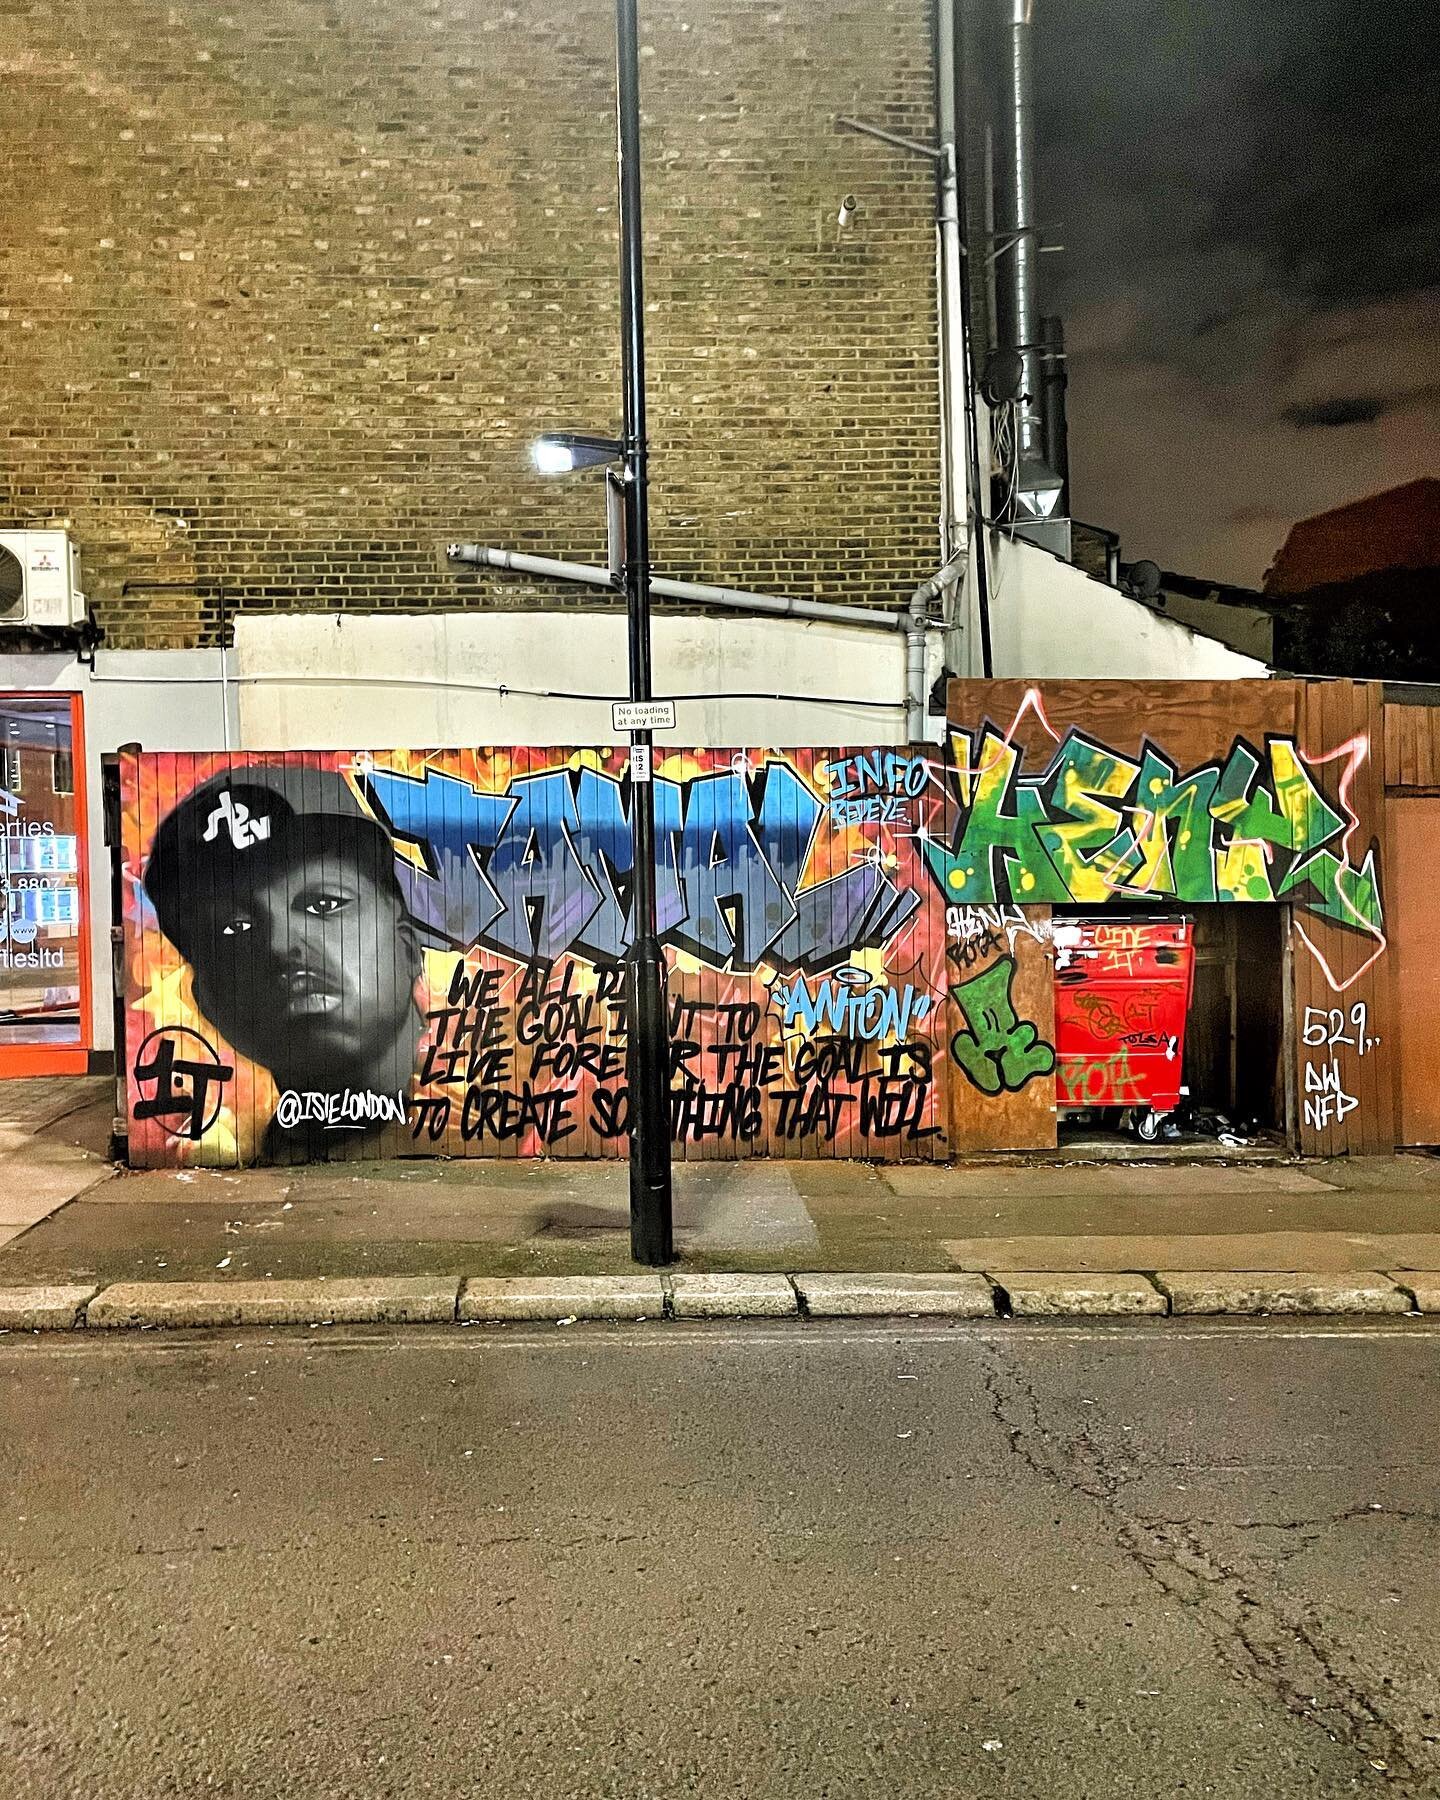 Passed by tonight to see the new graffiti art that has appeared opposite the Jamal mural - people are still arriving by car and on foot every minute - beautiful to witness people from all walks of life standing together and comforting each other in a